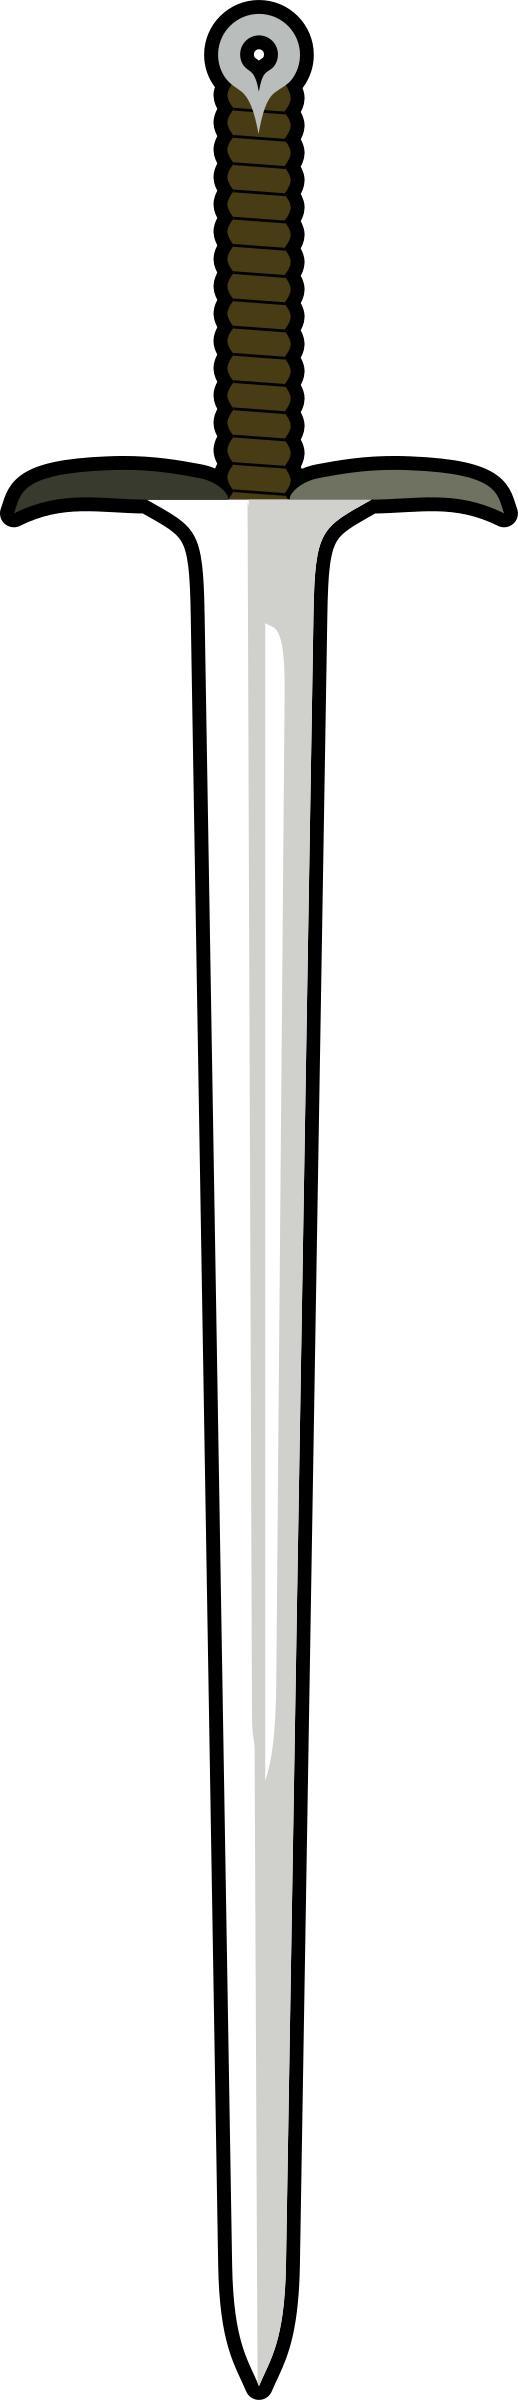 Sword by Rones png transparent